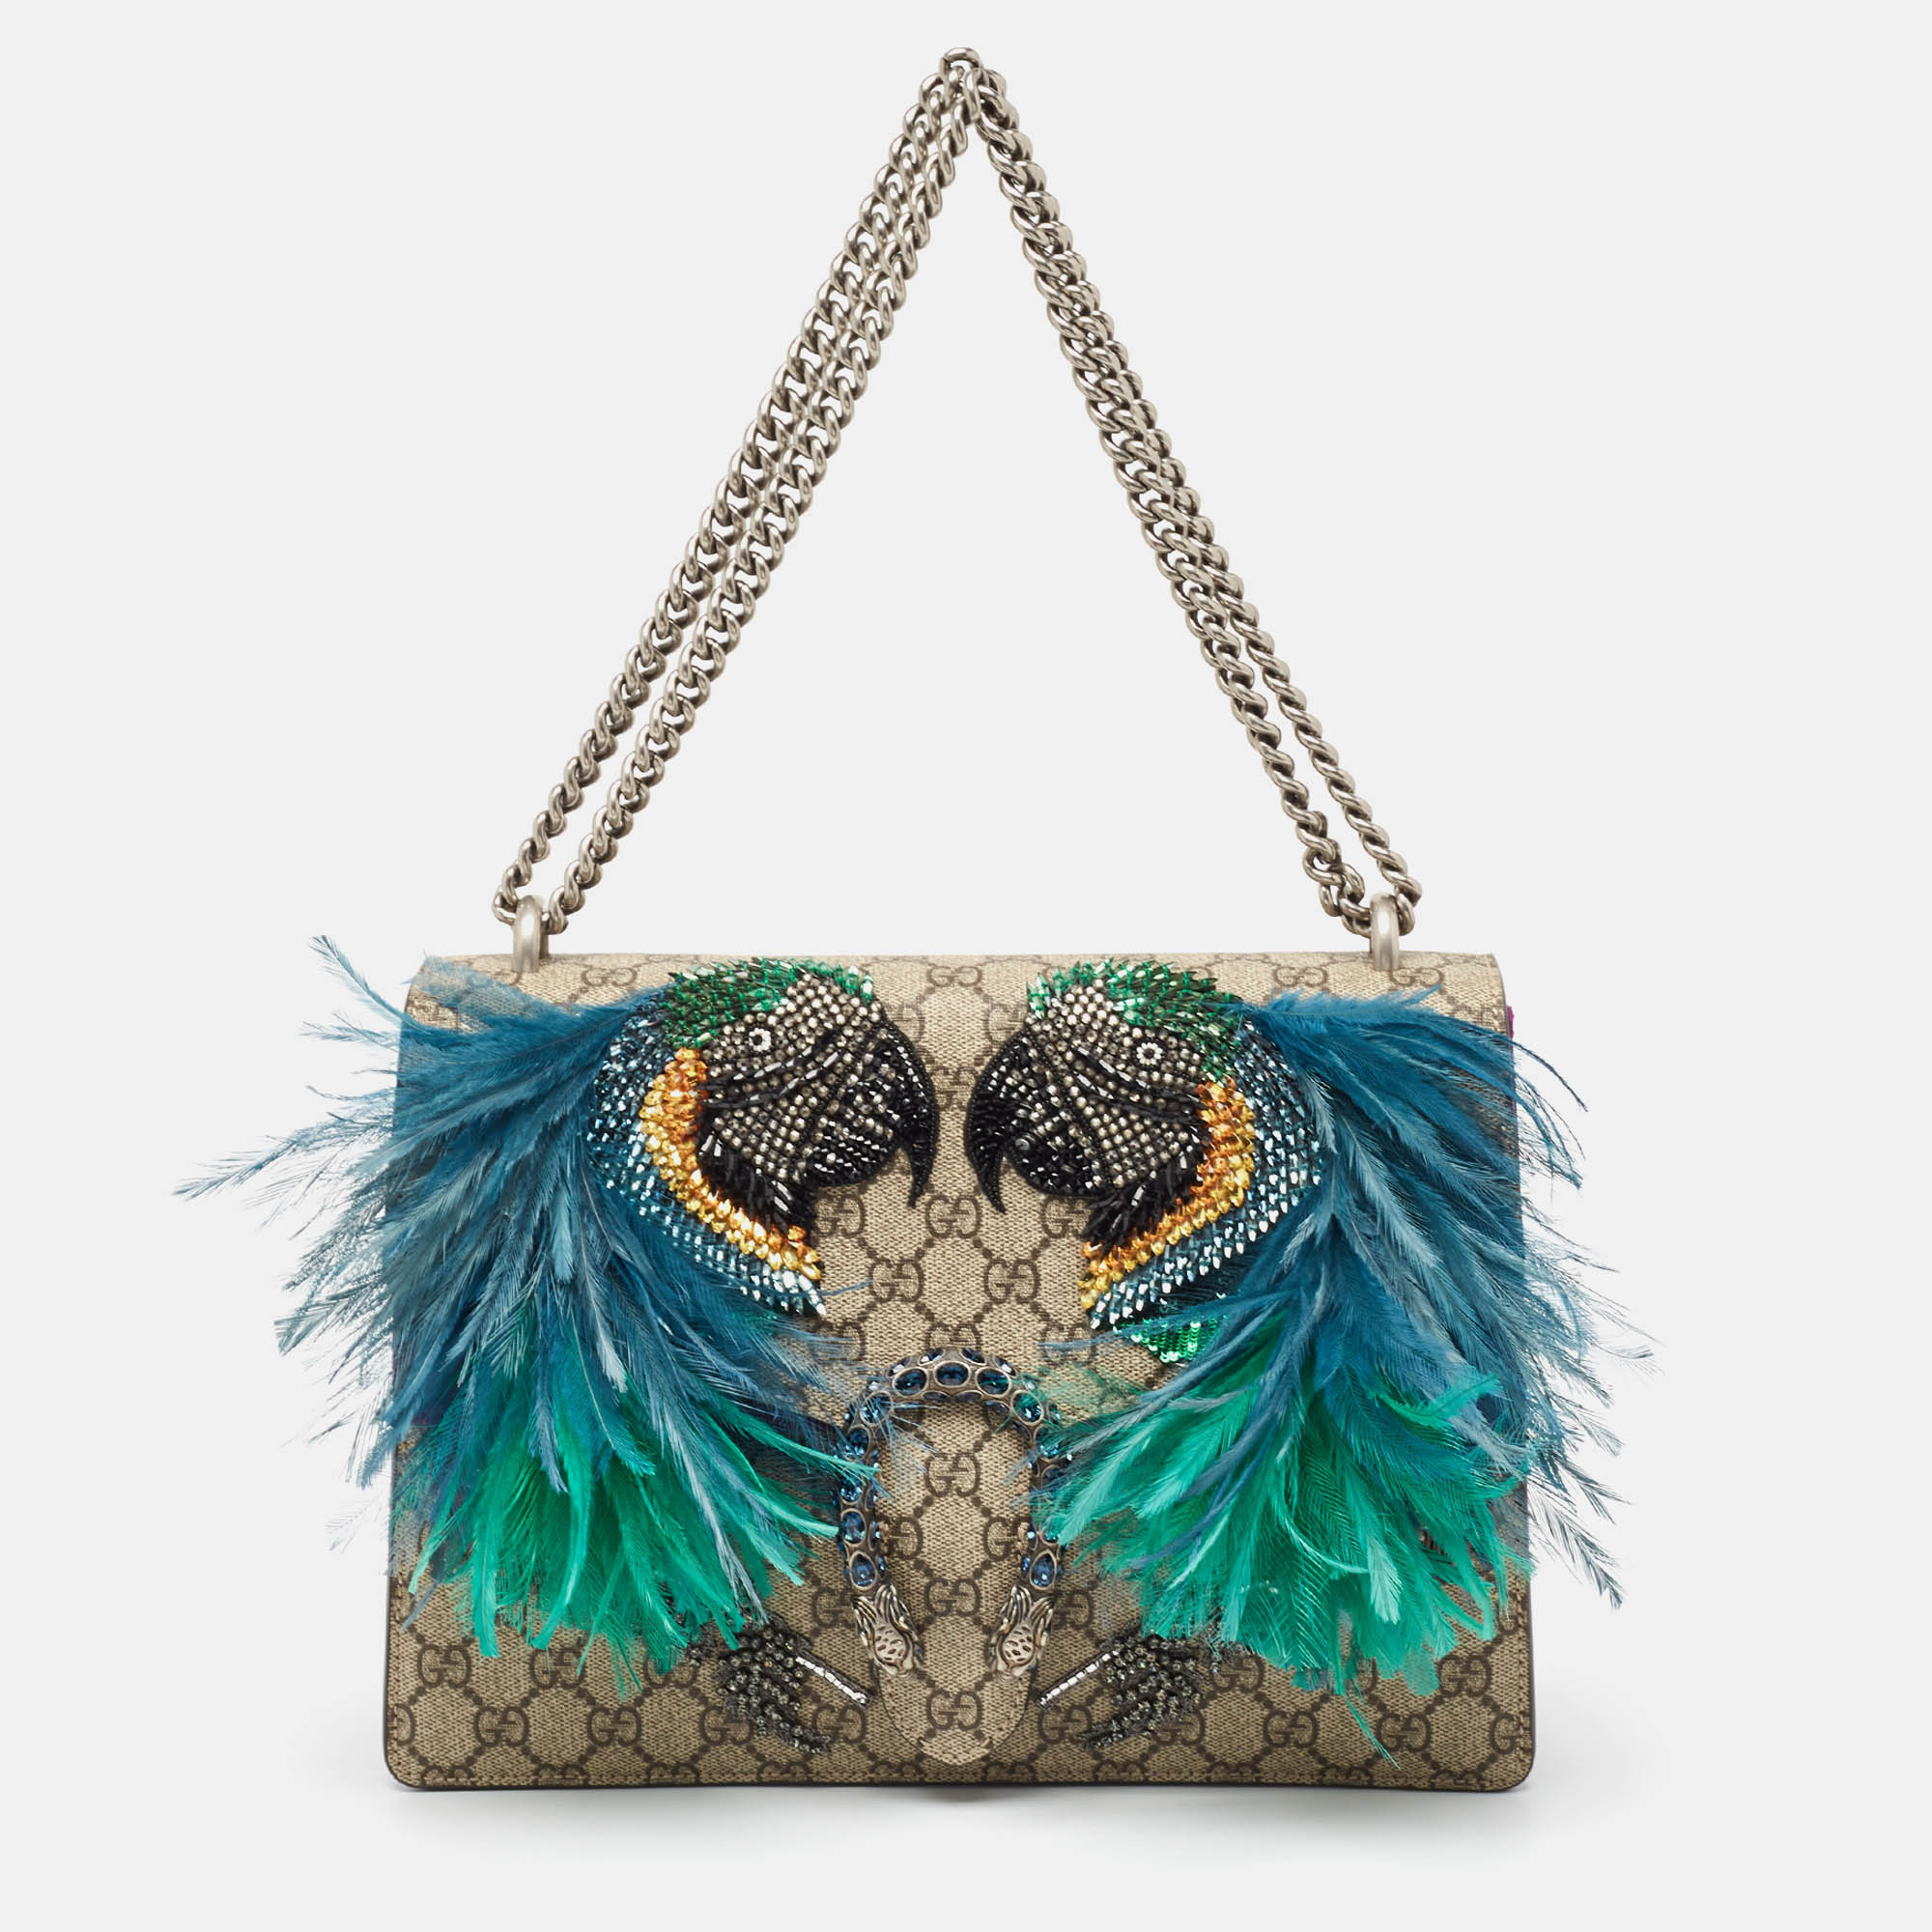 Presenting the Gucci Dionysus shoulder bag a fusion of opulent design and practicality. Crafted with the iconic GG Supreme canvas and lush suede adorned with a striking parrot motif it exudes a captivating charm. Versatile and chic its a timeless accessory for the fashion forward.